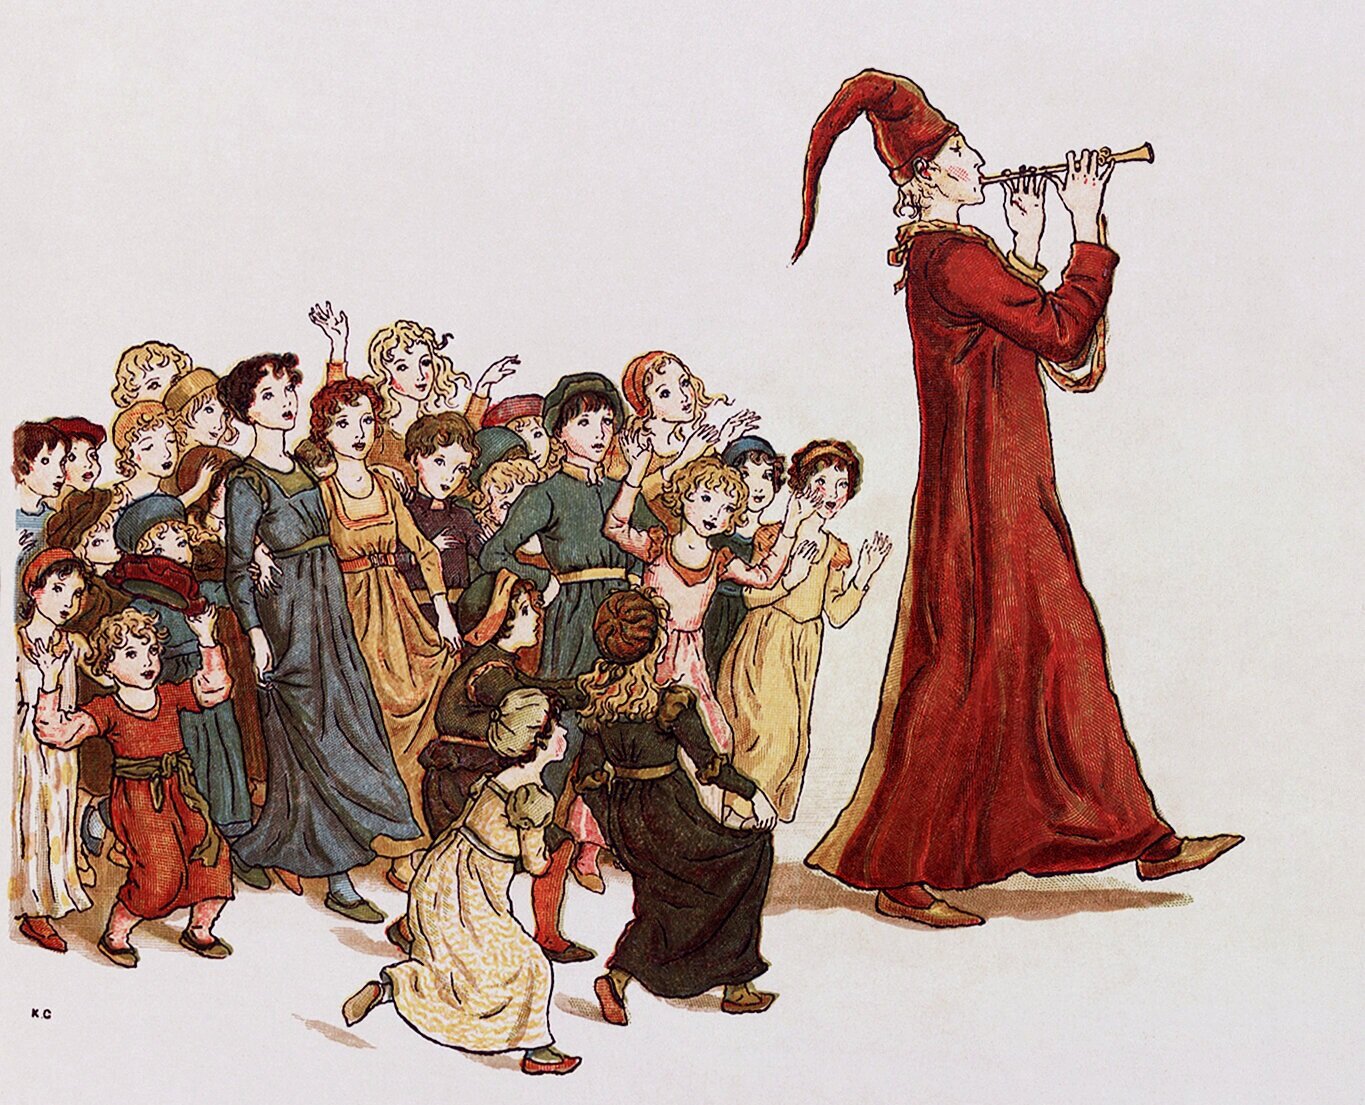  Illustration by Kate Greenaway of the Pied Piper leading the children out of town, for the publication of  Robert Browning’s poem,  The Pied Piper of Hamelin   